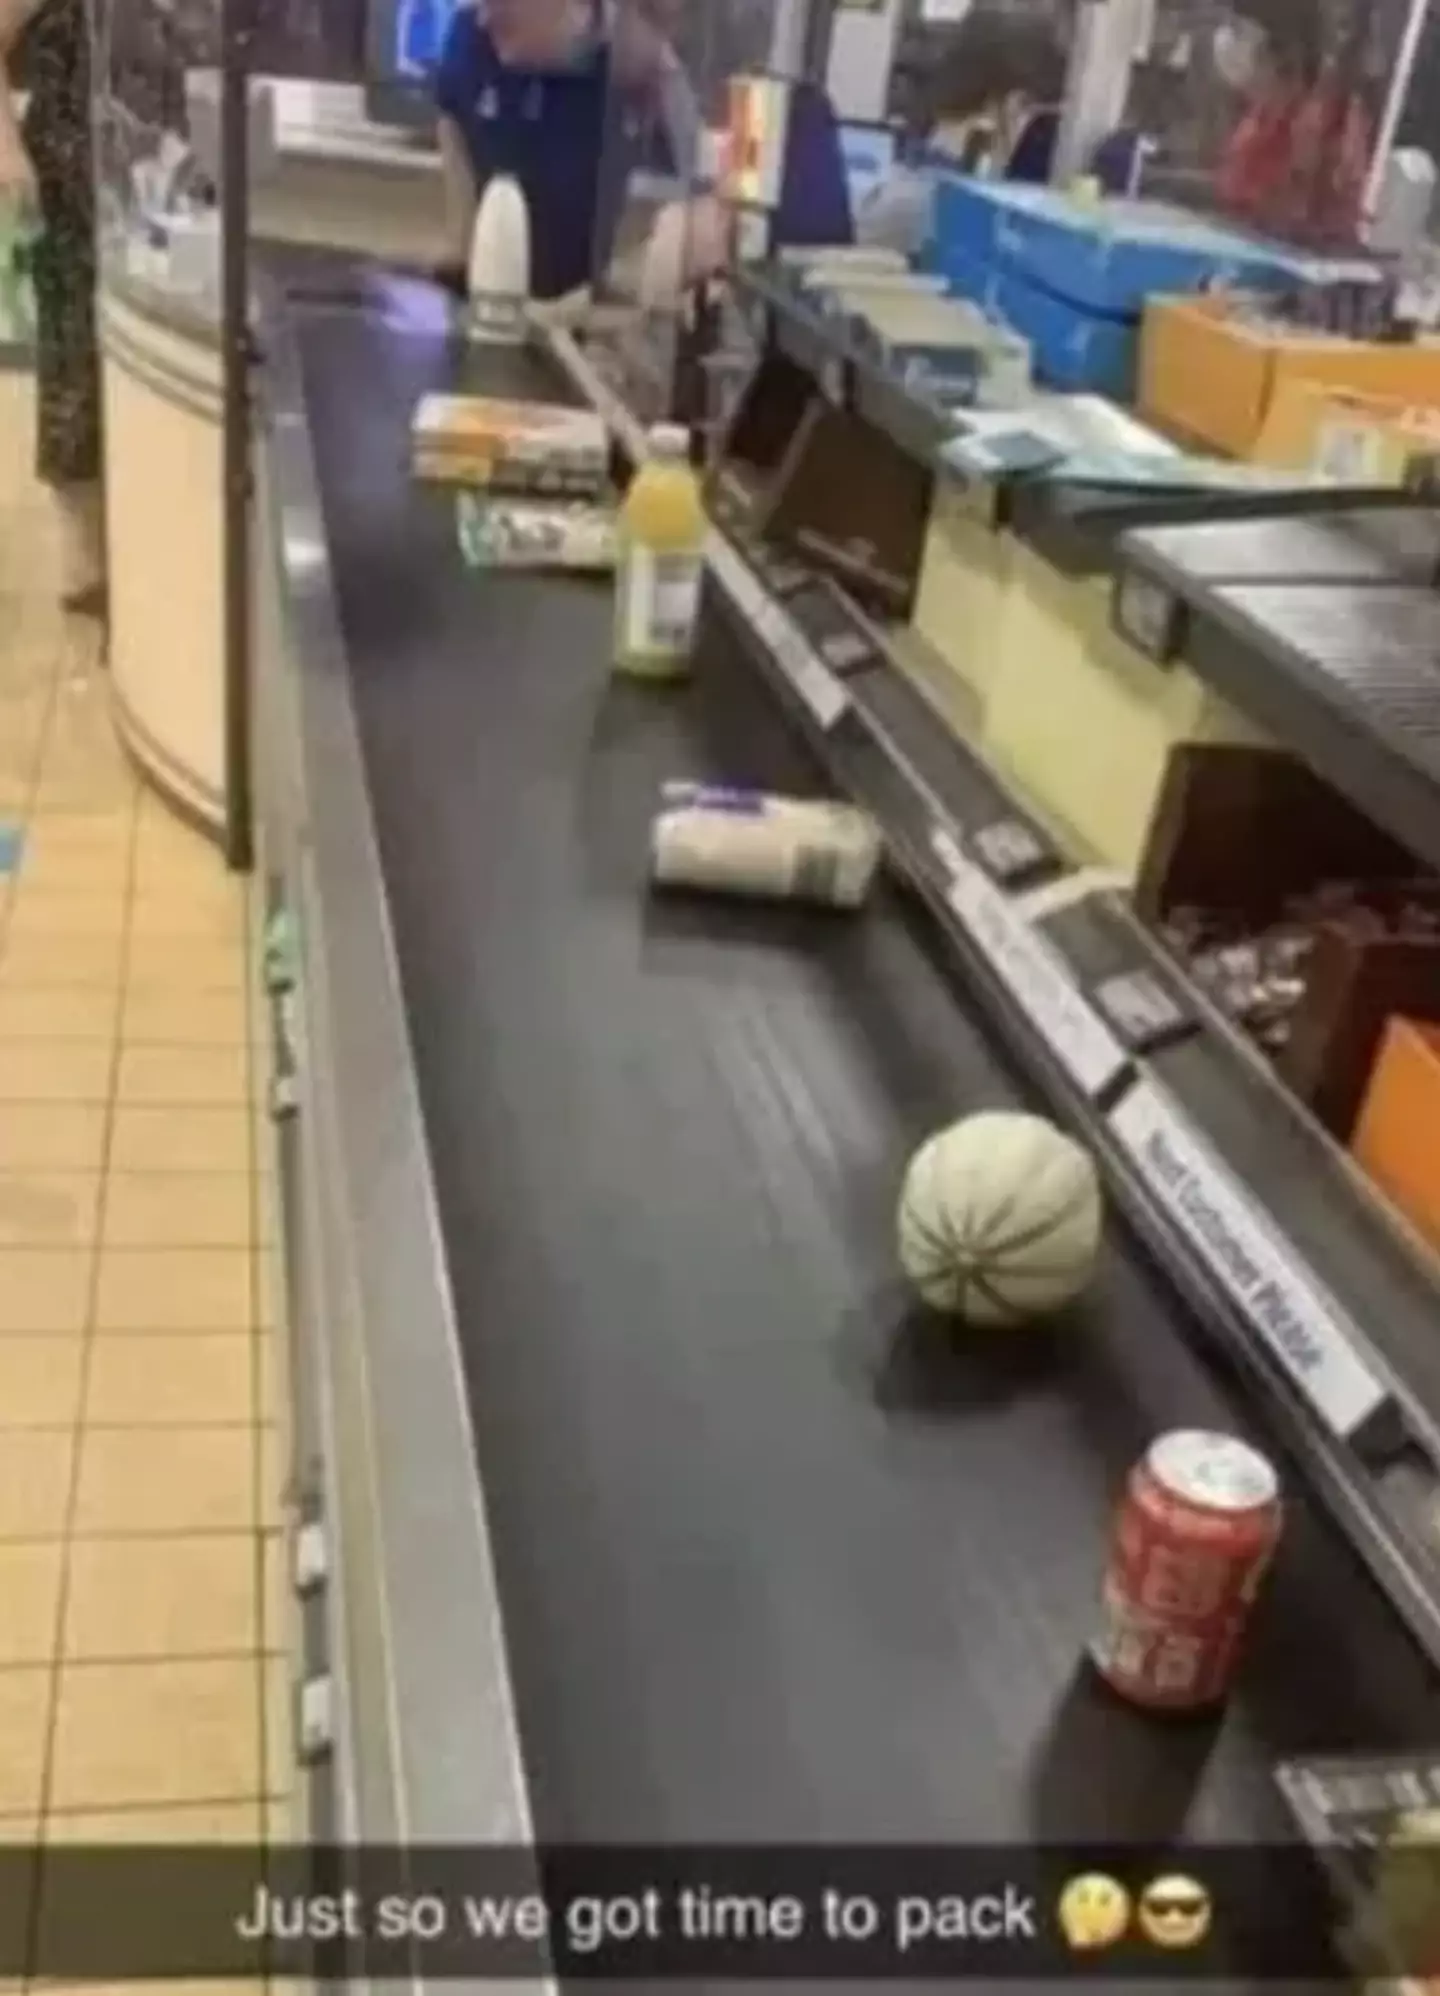 The trick is to space out your shopping on the conveyor belt.